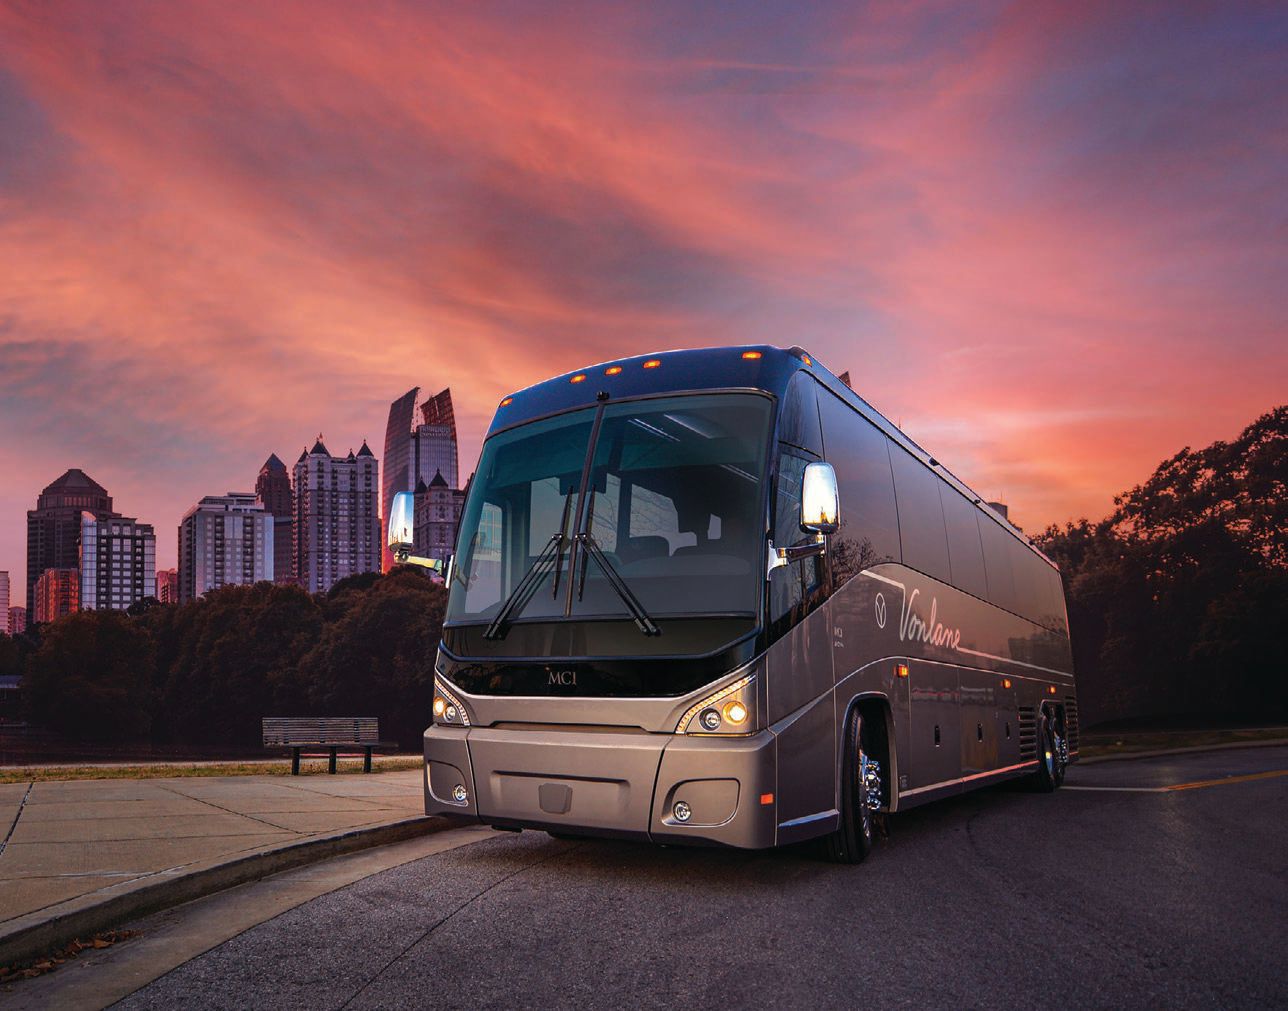 Upgrade Your Roadtrip With Vonlane: The Texas-Based, Luxury Motor Coach Service